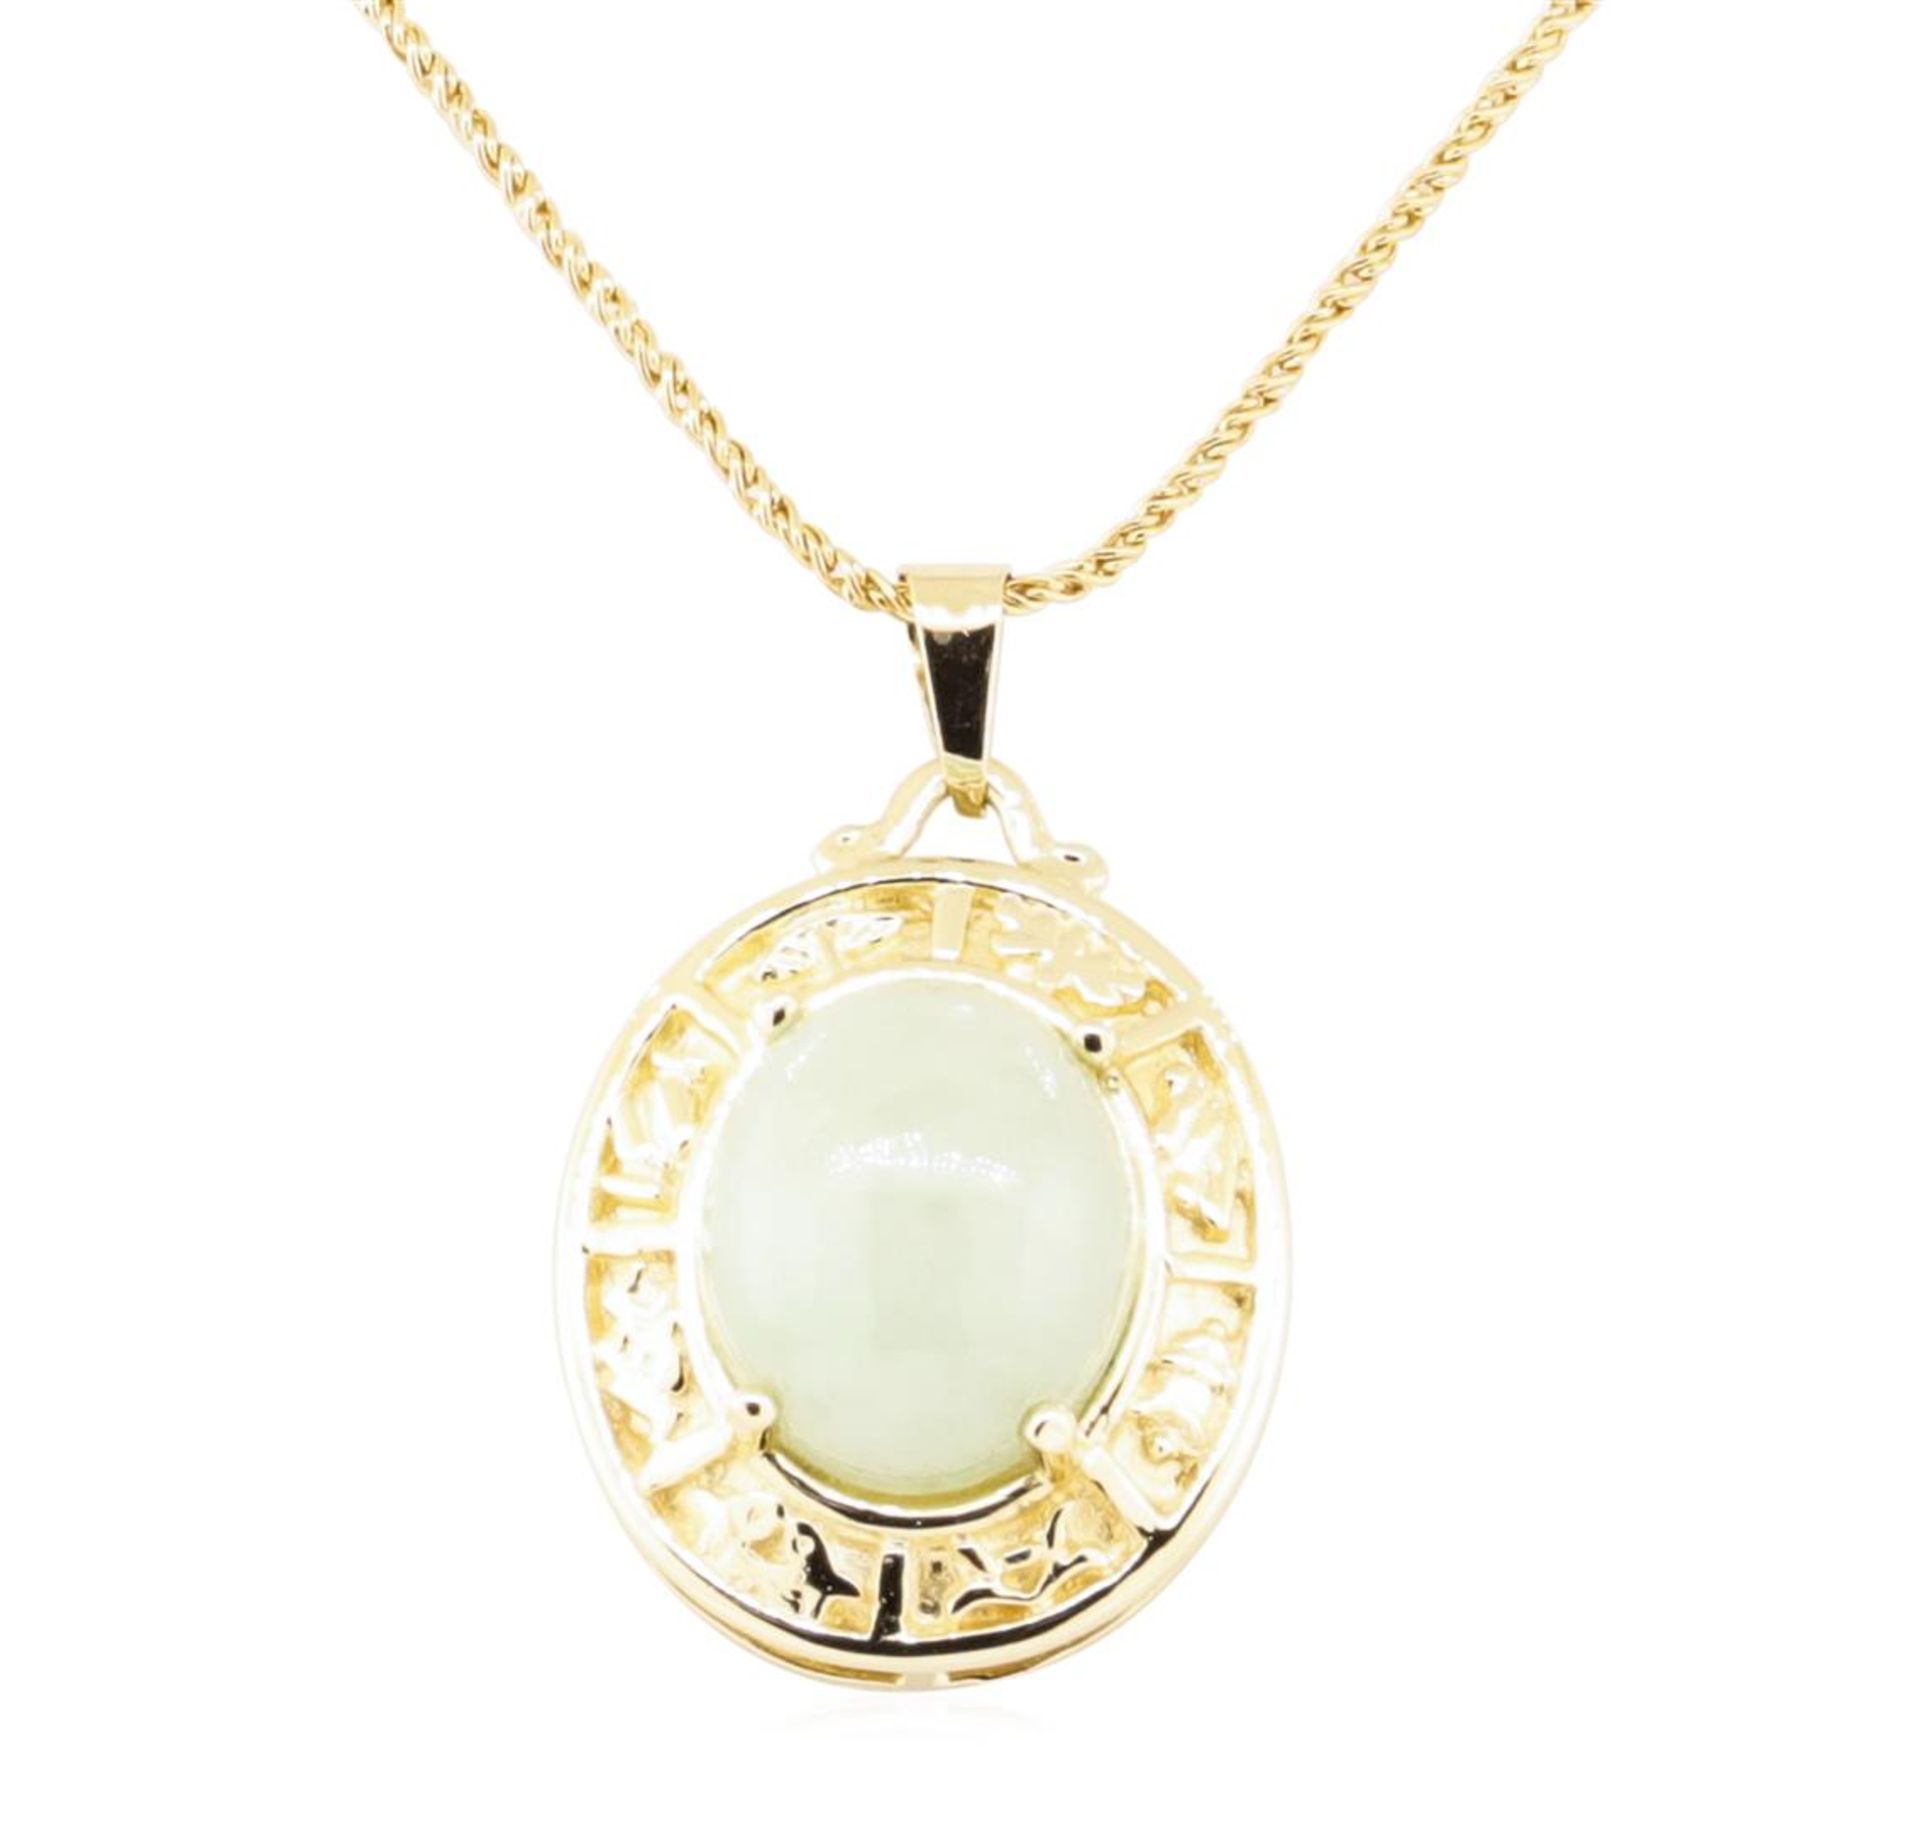 12mm x 10mm Cabochon Jade Pendant with Chain - 14KT + 18KT Yellow Gold - Image 2 of 2